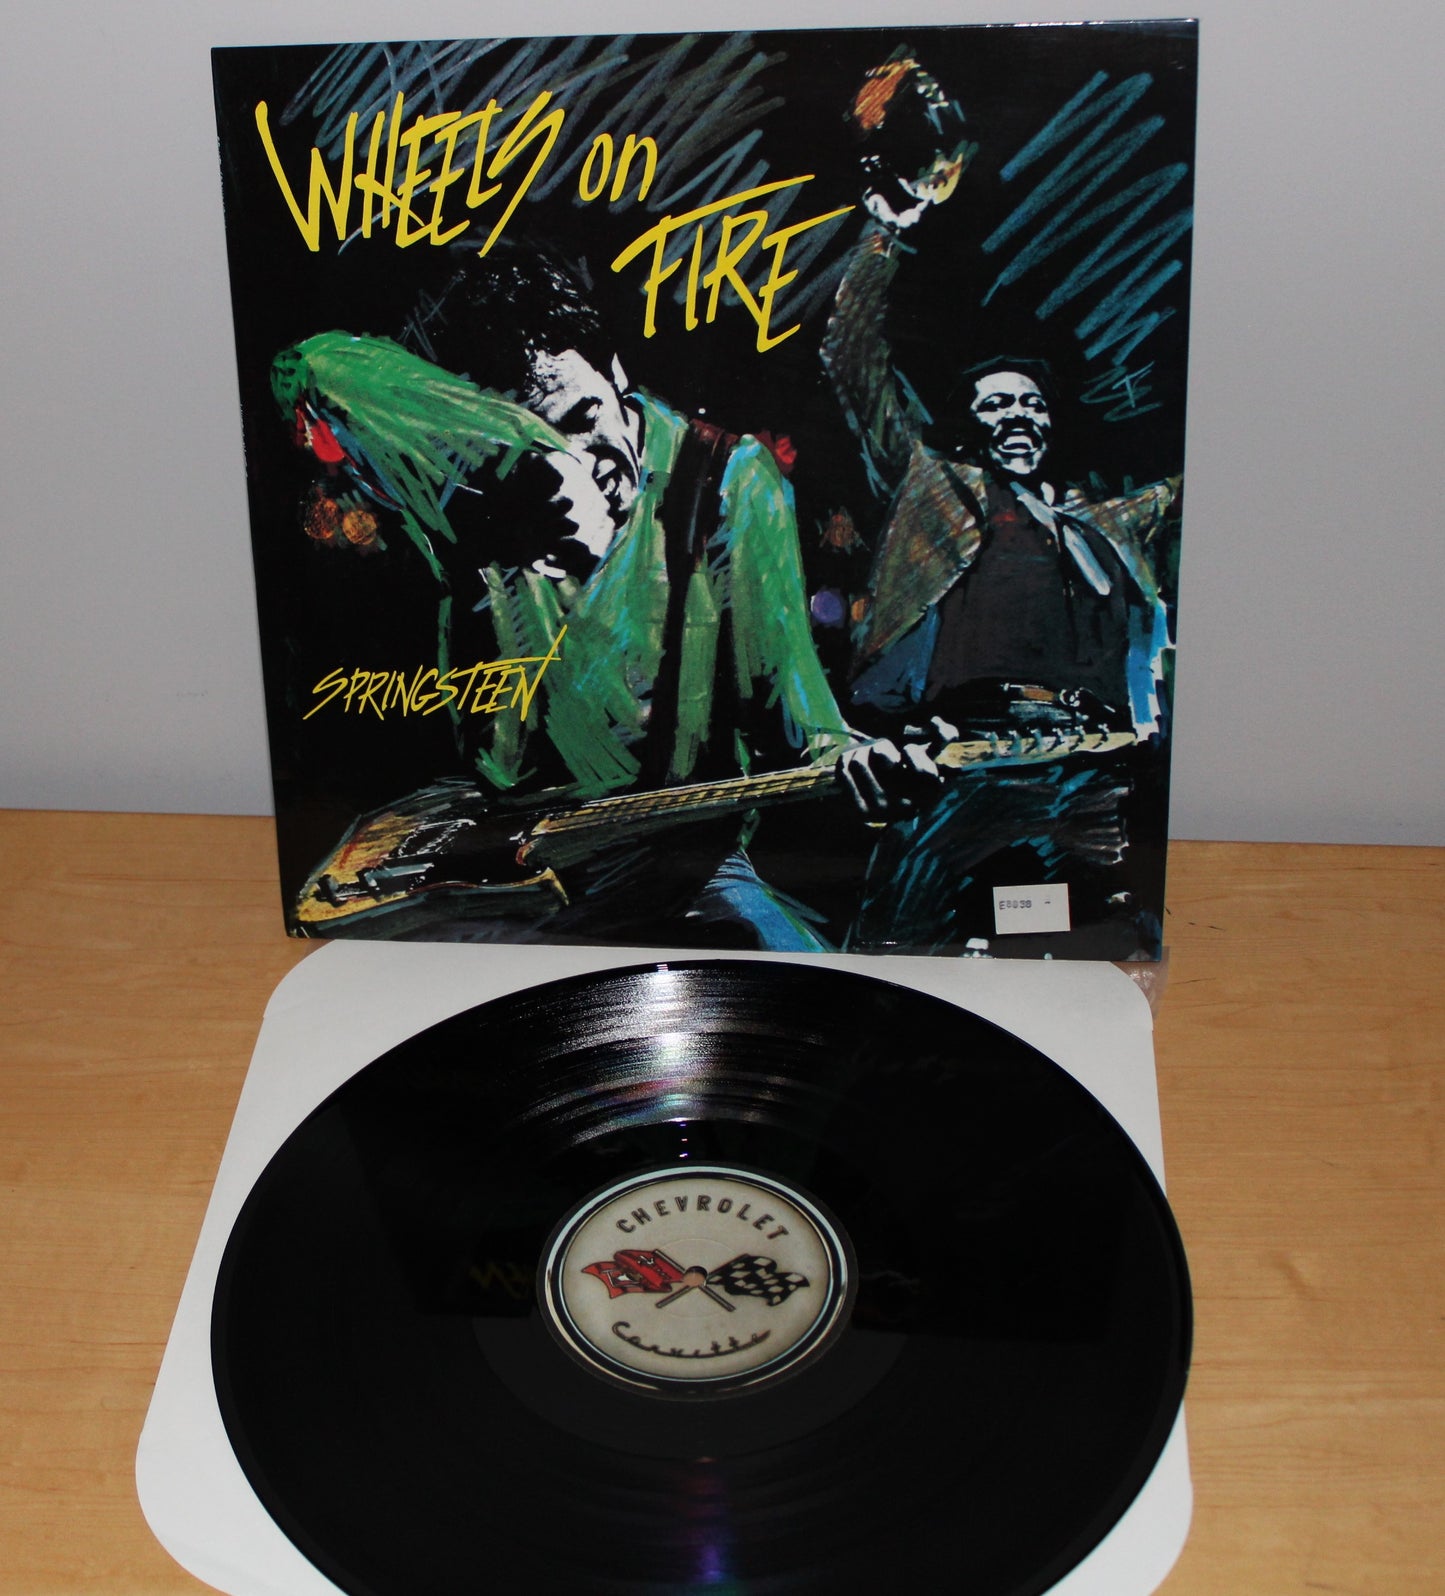 Bruce Springsteen – Wheels On Fire – Unofficial Vinyl – Live in GB 1981